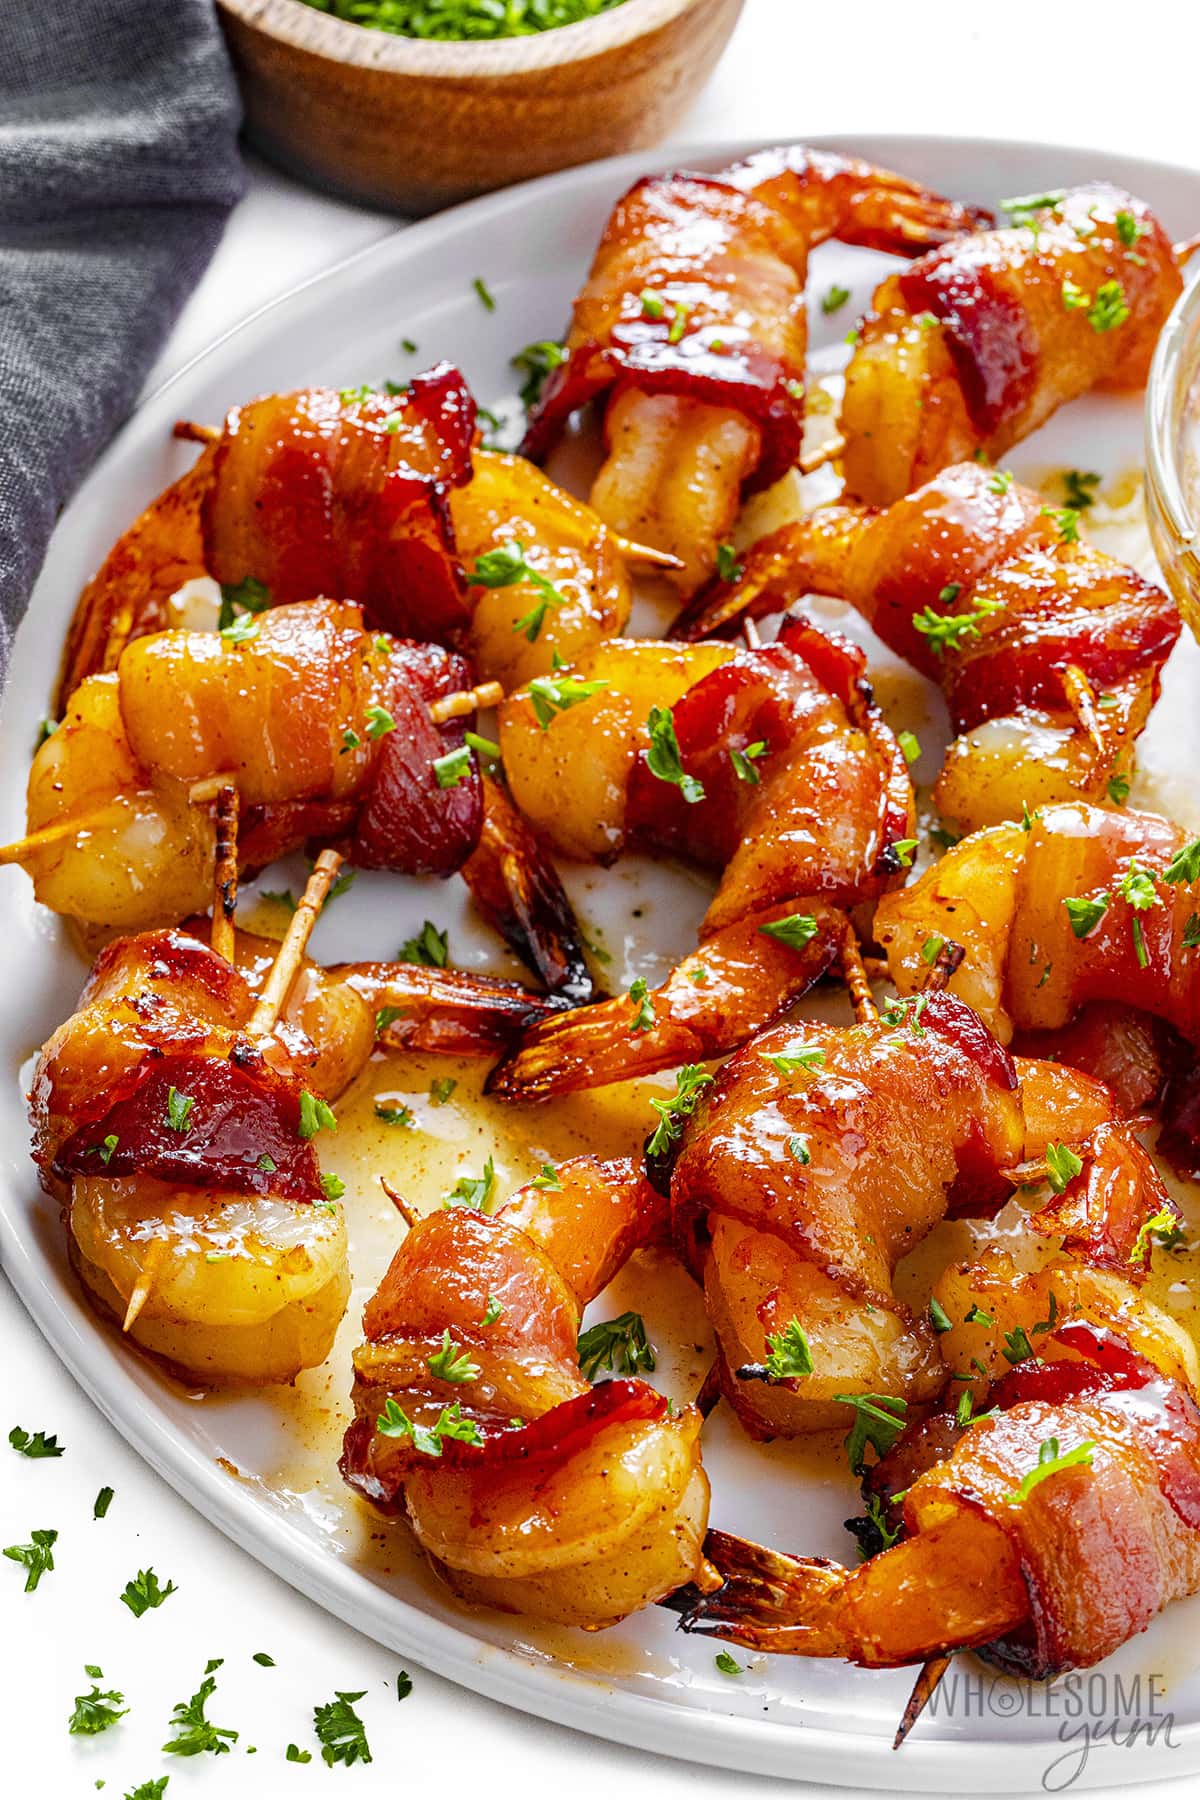 Bacon wrapped shrimp recipe on a plate.